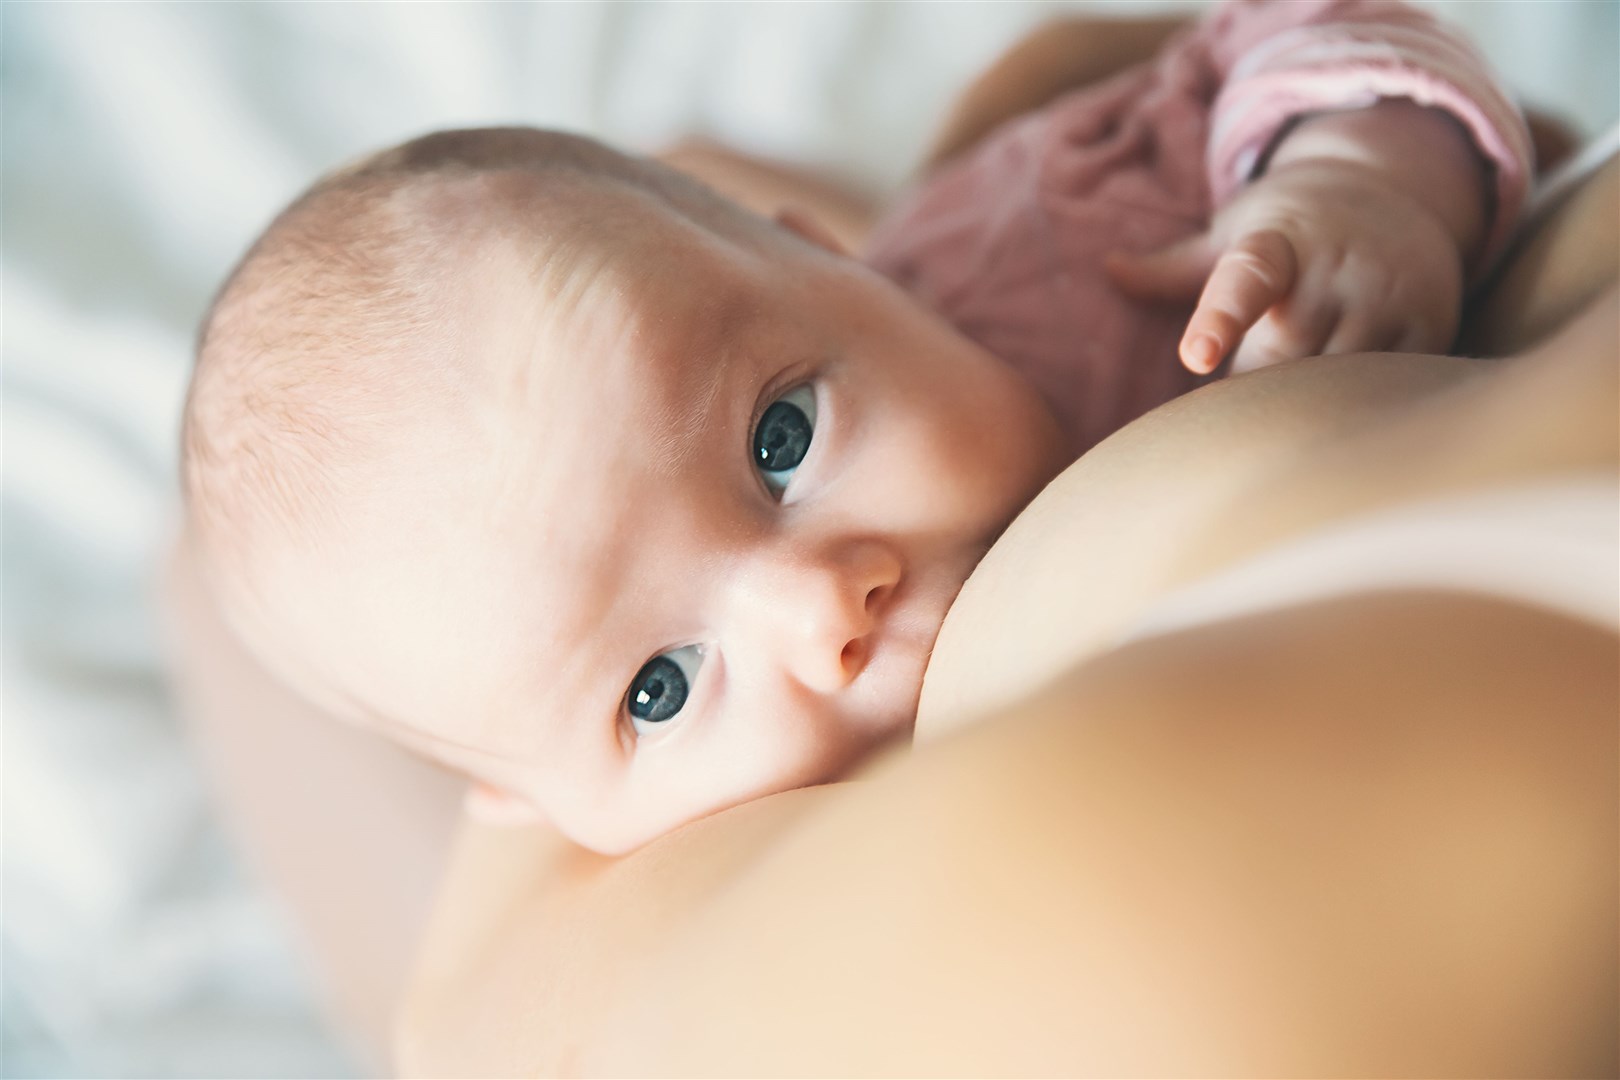 'The question must be: what can be done to support mothers who want to continue to breastfeed transition from maternity leave back into the workplace?' Picture: Adobe Stock